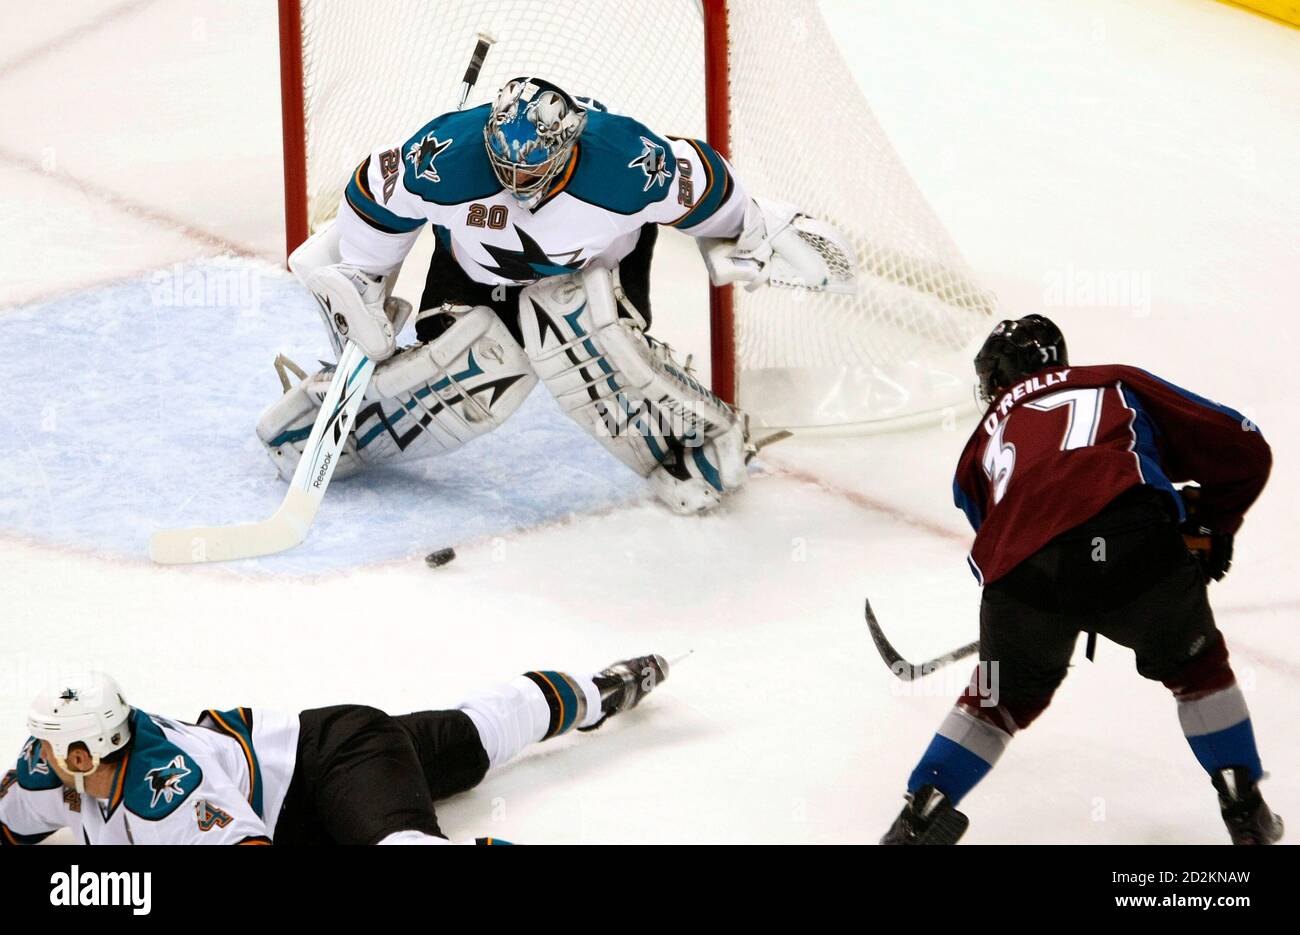 San Jose Sharks goalie Evgeni Nabokov (C) deflects a shot by  Colorado Avalanche center Ryan O'Reilly in Game 3 of their NHL Western Conference quarter-final hockey game in Denver April 18, 2010. REUTERS/Rick Wilking (UNITED STATES - Tags: SPORT ICE HOCKEY) Stock Photo